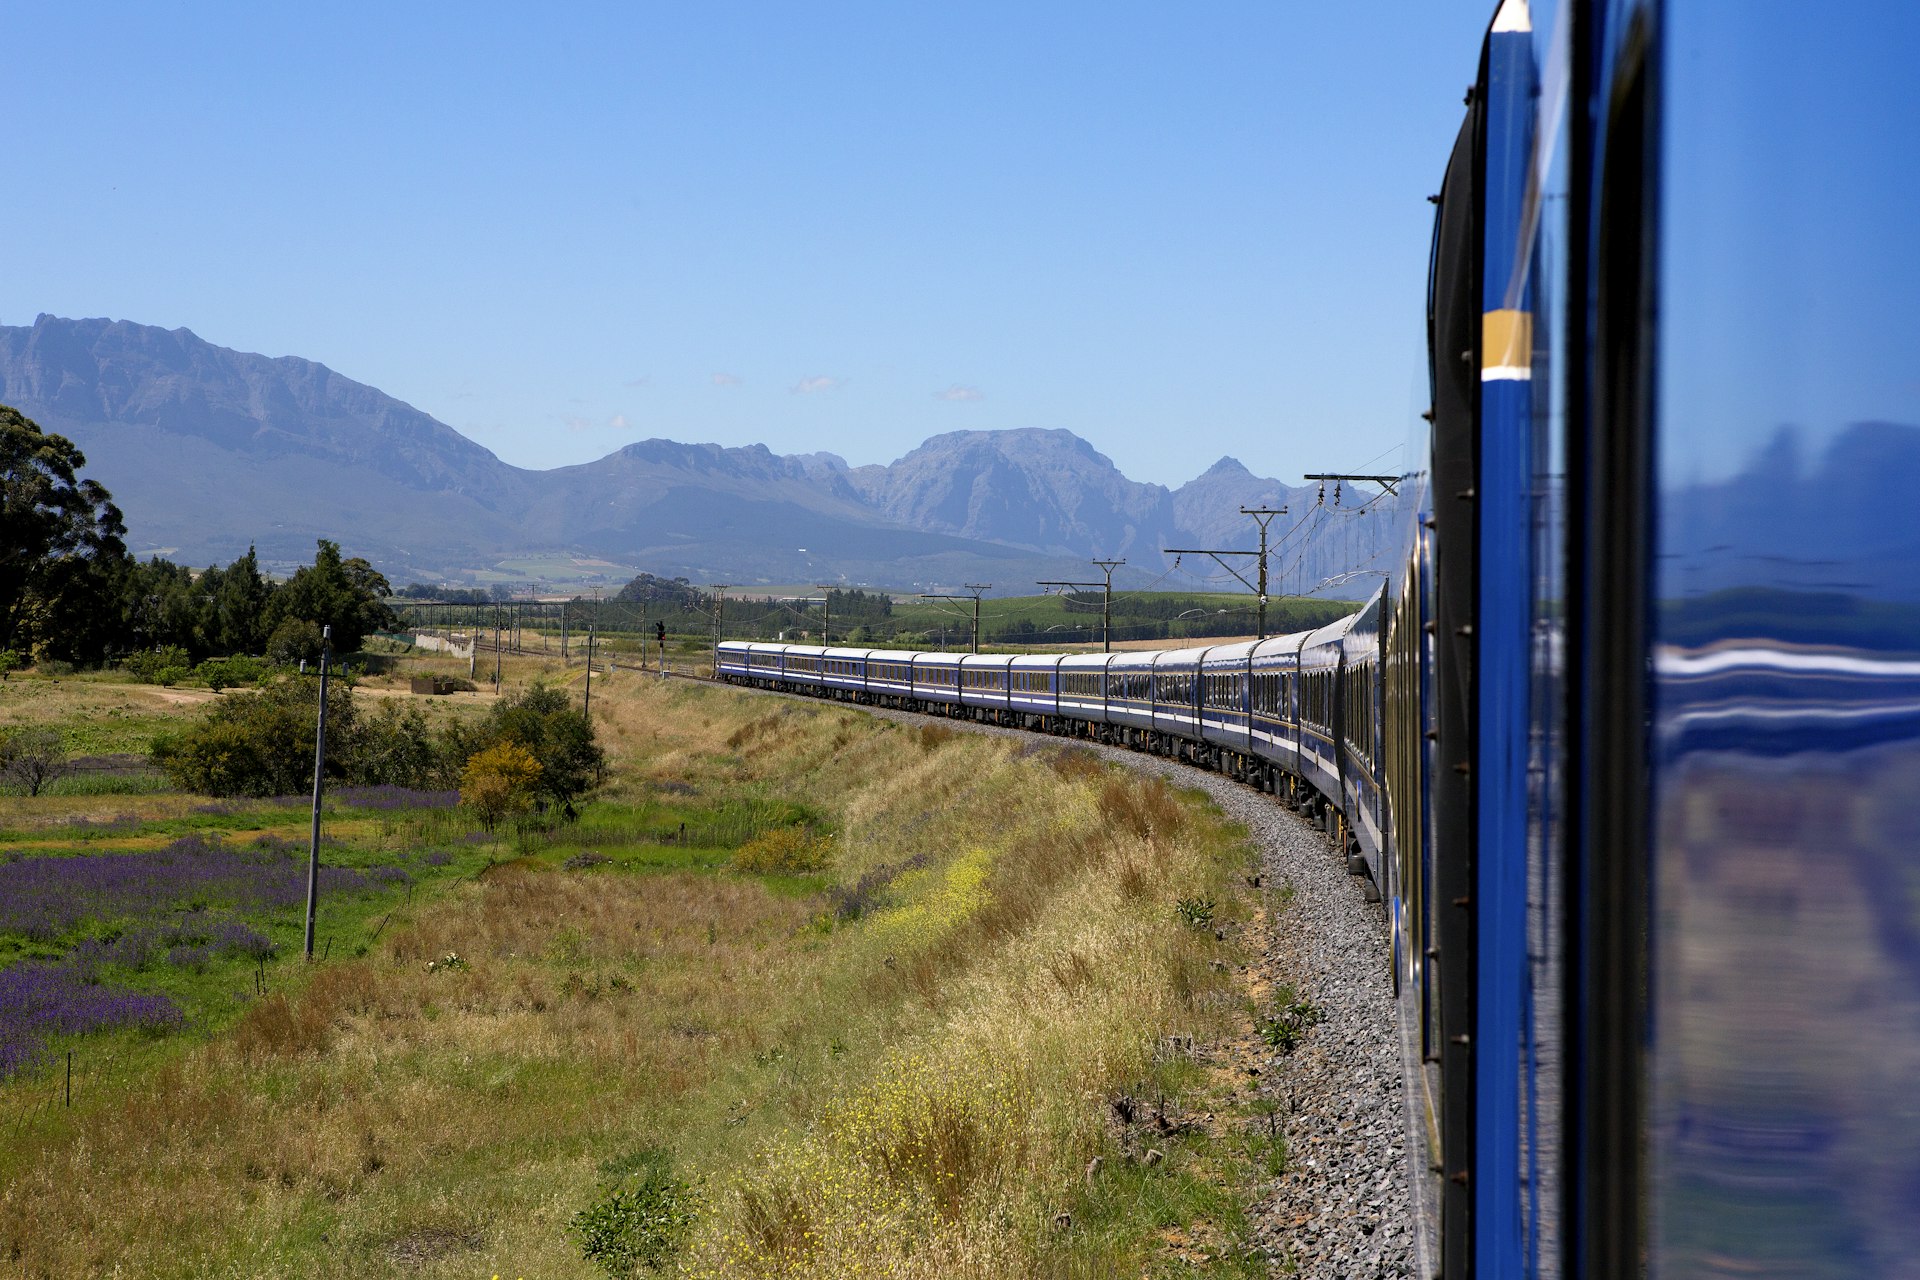 The Blue Train passing peaks of Simonsberg on the route from Cape Town to Pretoria, South Africa